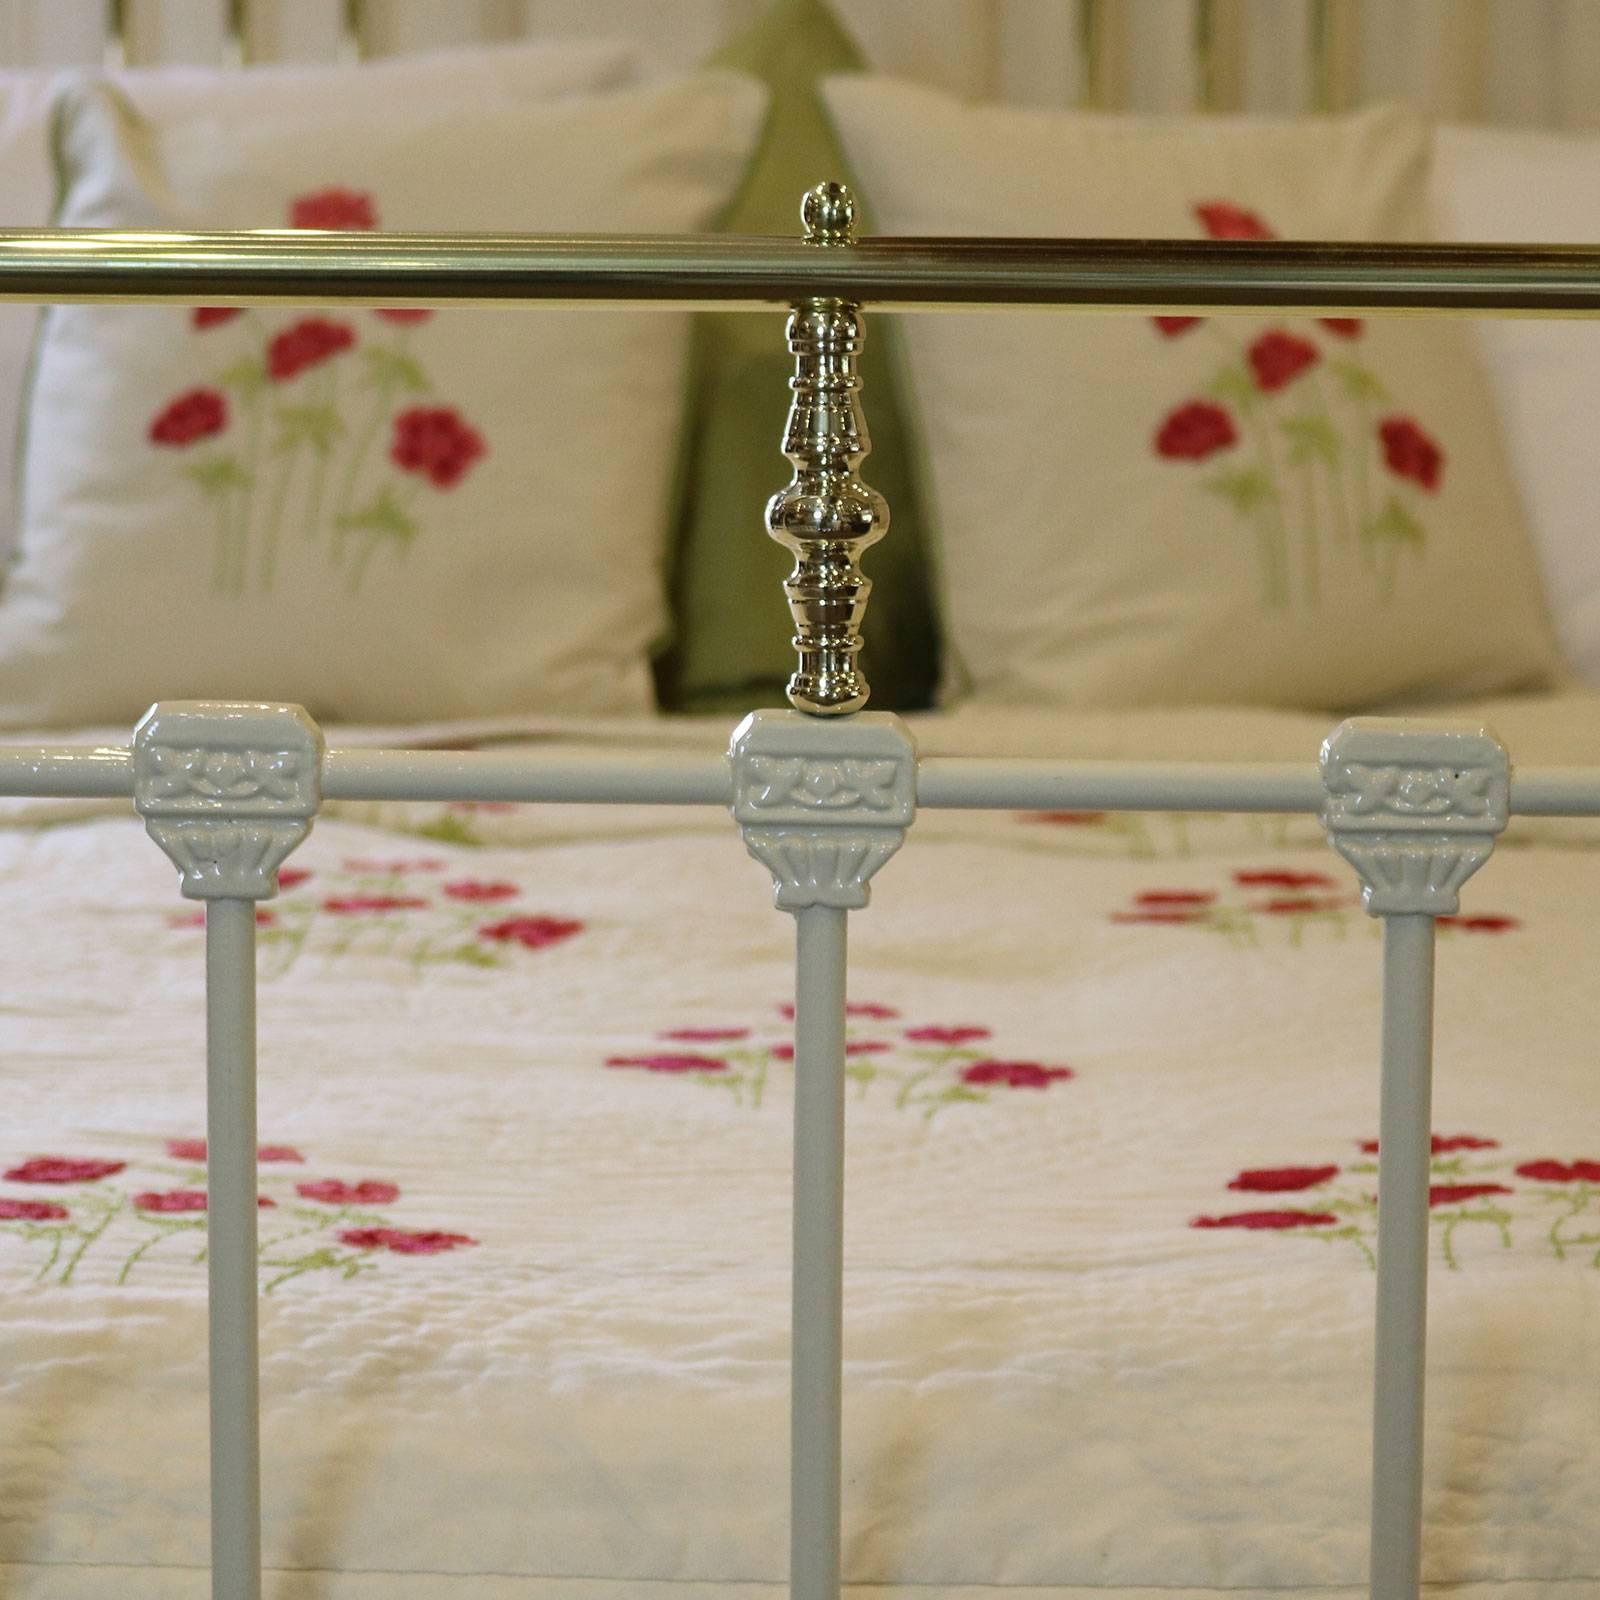 19th Century Wide Brass and Iron Bed in Cream, MK81